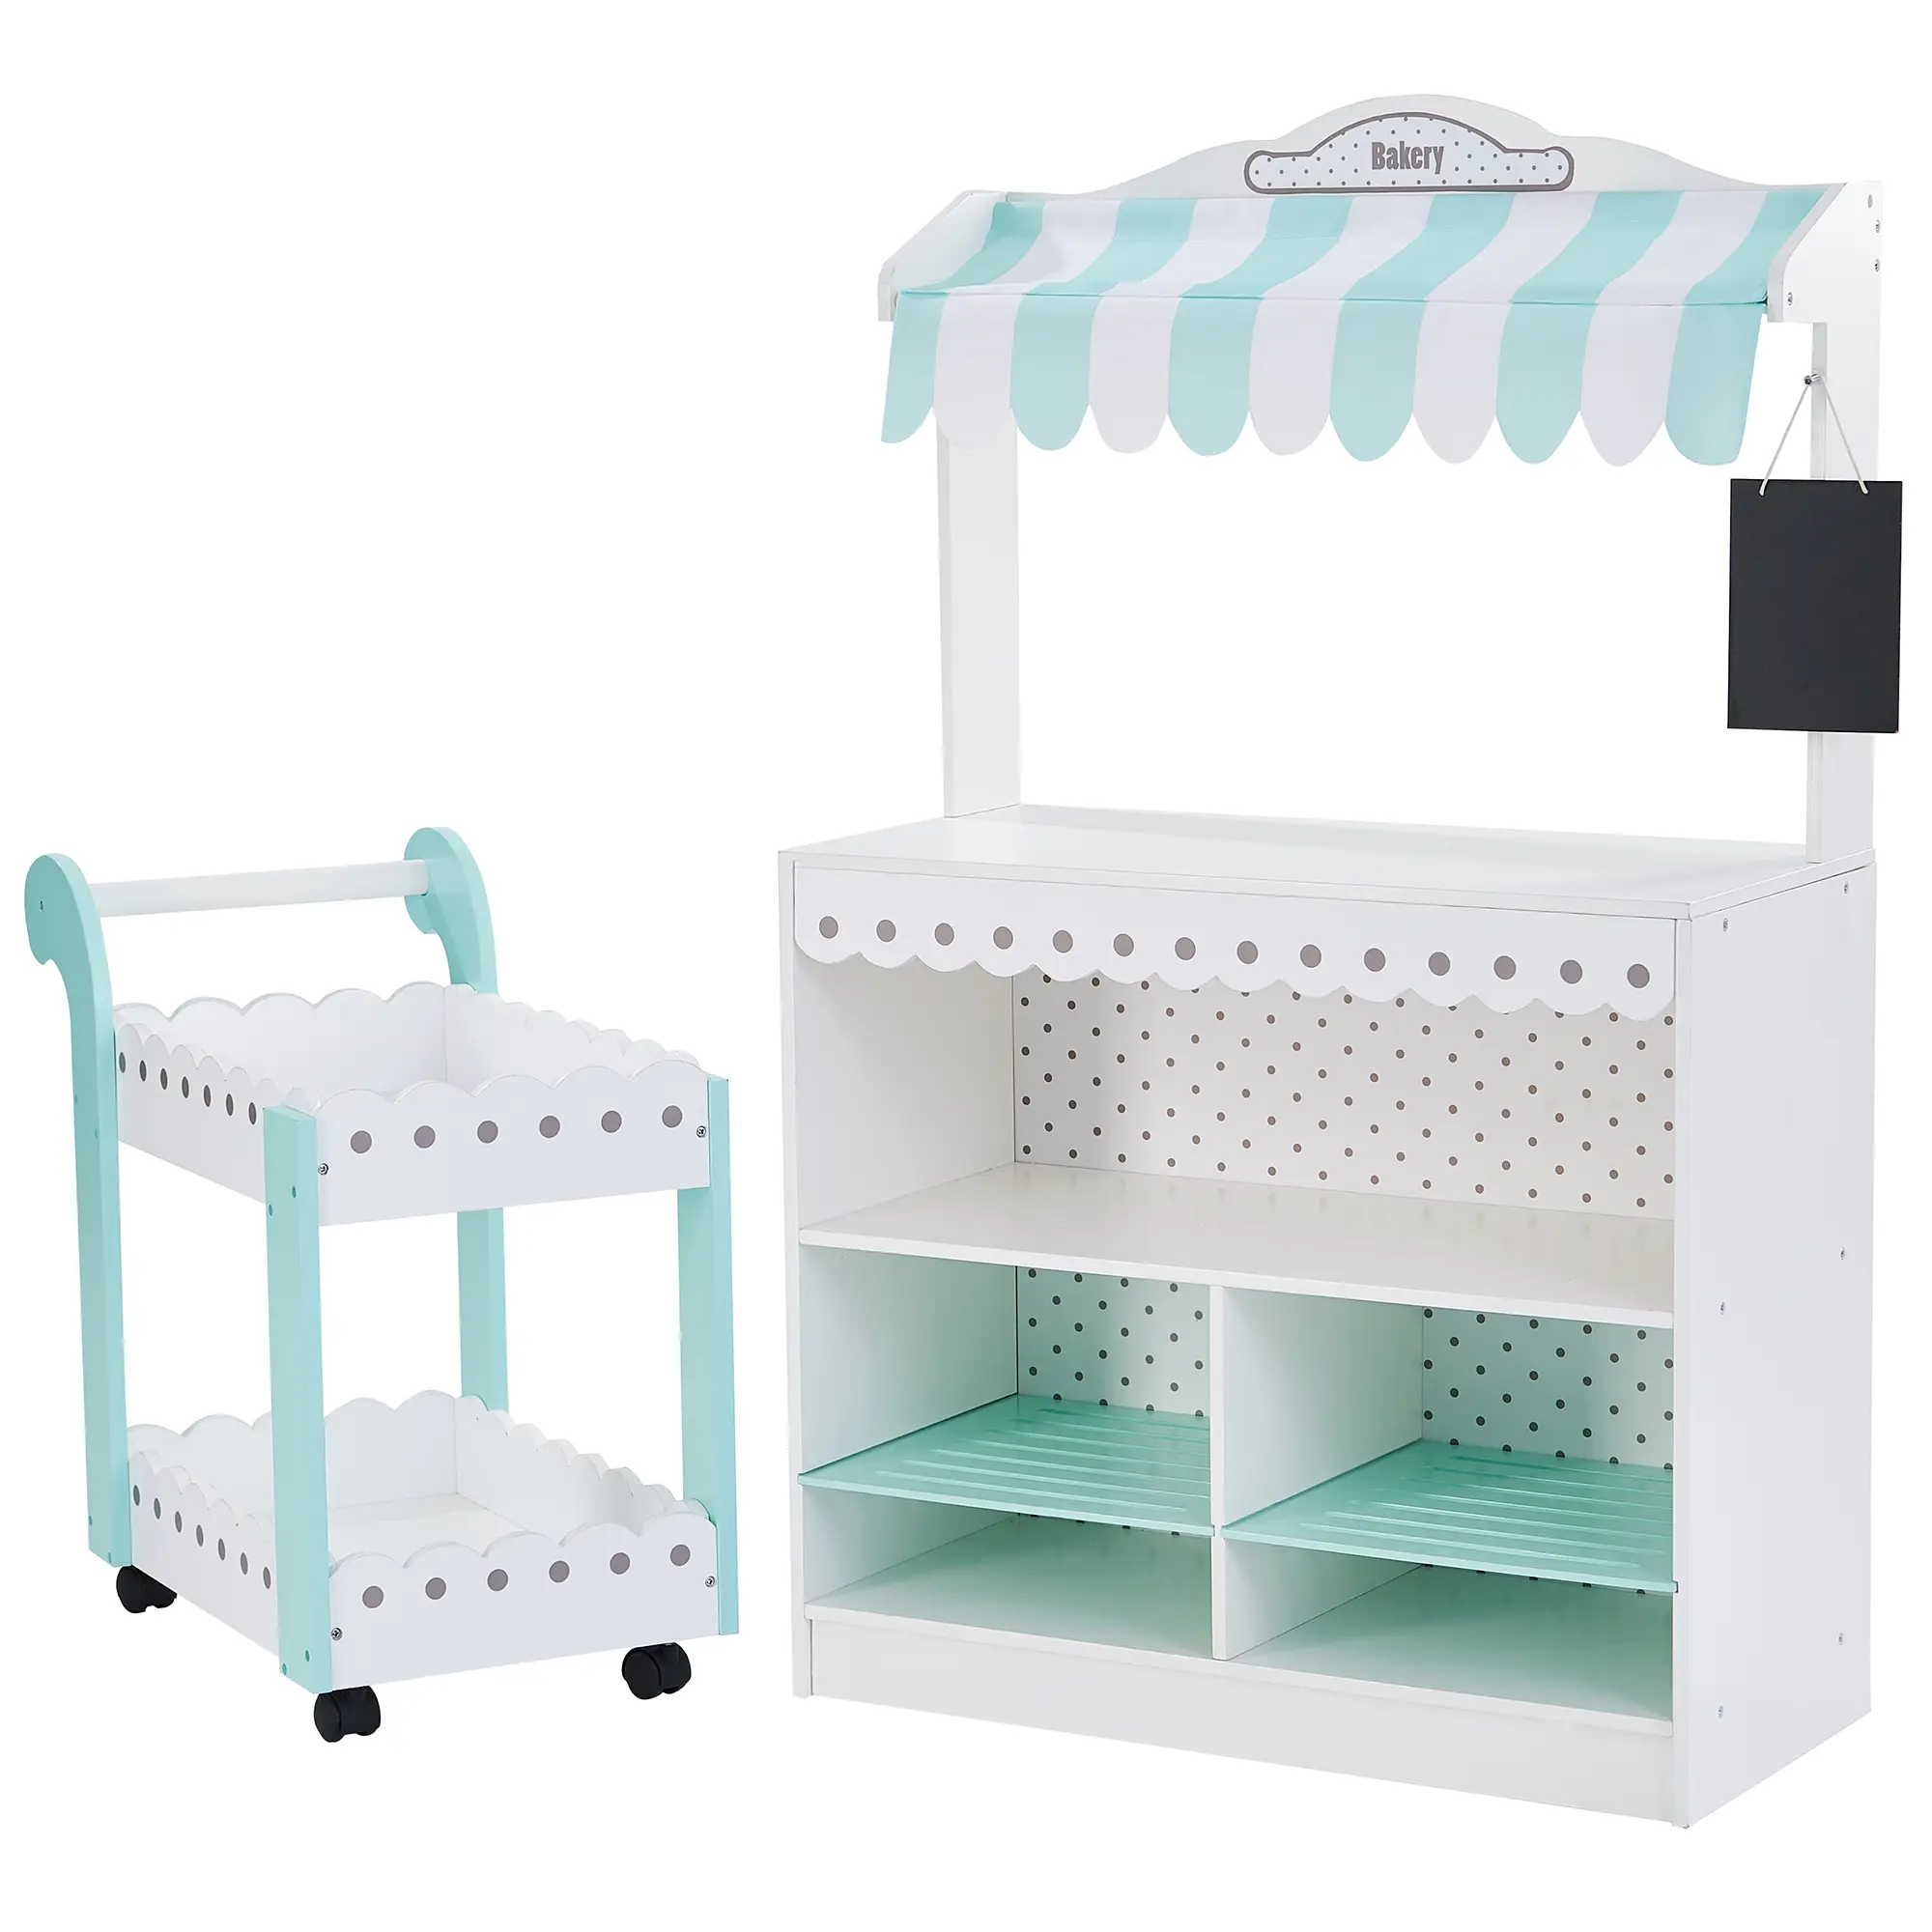 Kinder Desert Stand TD-13003A Stand Play